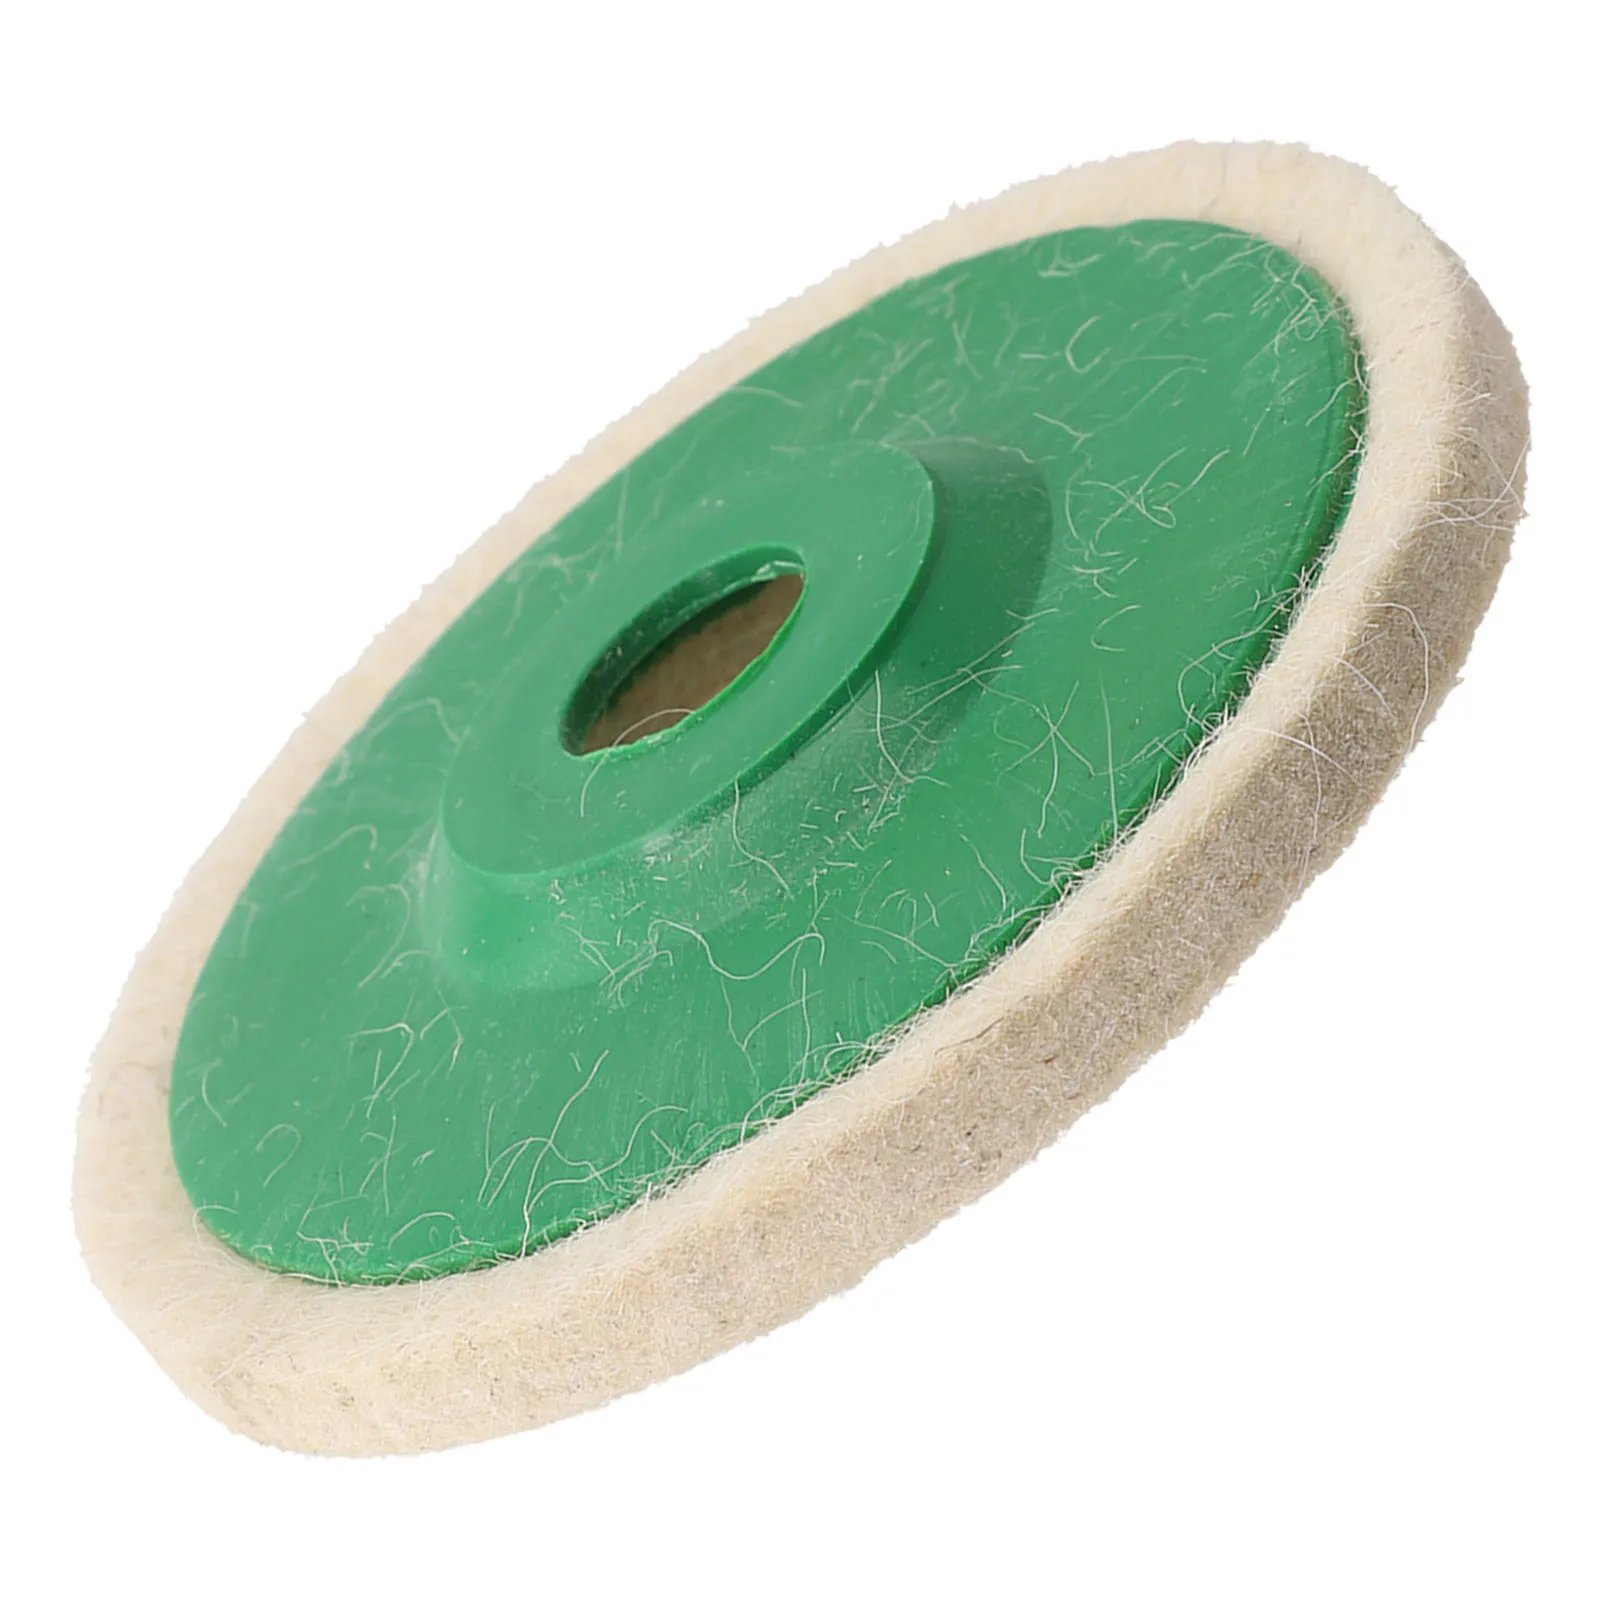 1 Pc 5Inch Wool Polishing Wheels Buffing Pads Angle Grinder Accessories Grinding Disc For Metal Glass Ceramic Polishing Tools 20pcs wool polishing wheel 3 2 35mm handle grinding buffing wheel sanding head grinding pad rotary tools accessories abrasive